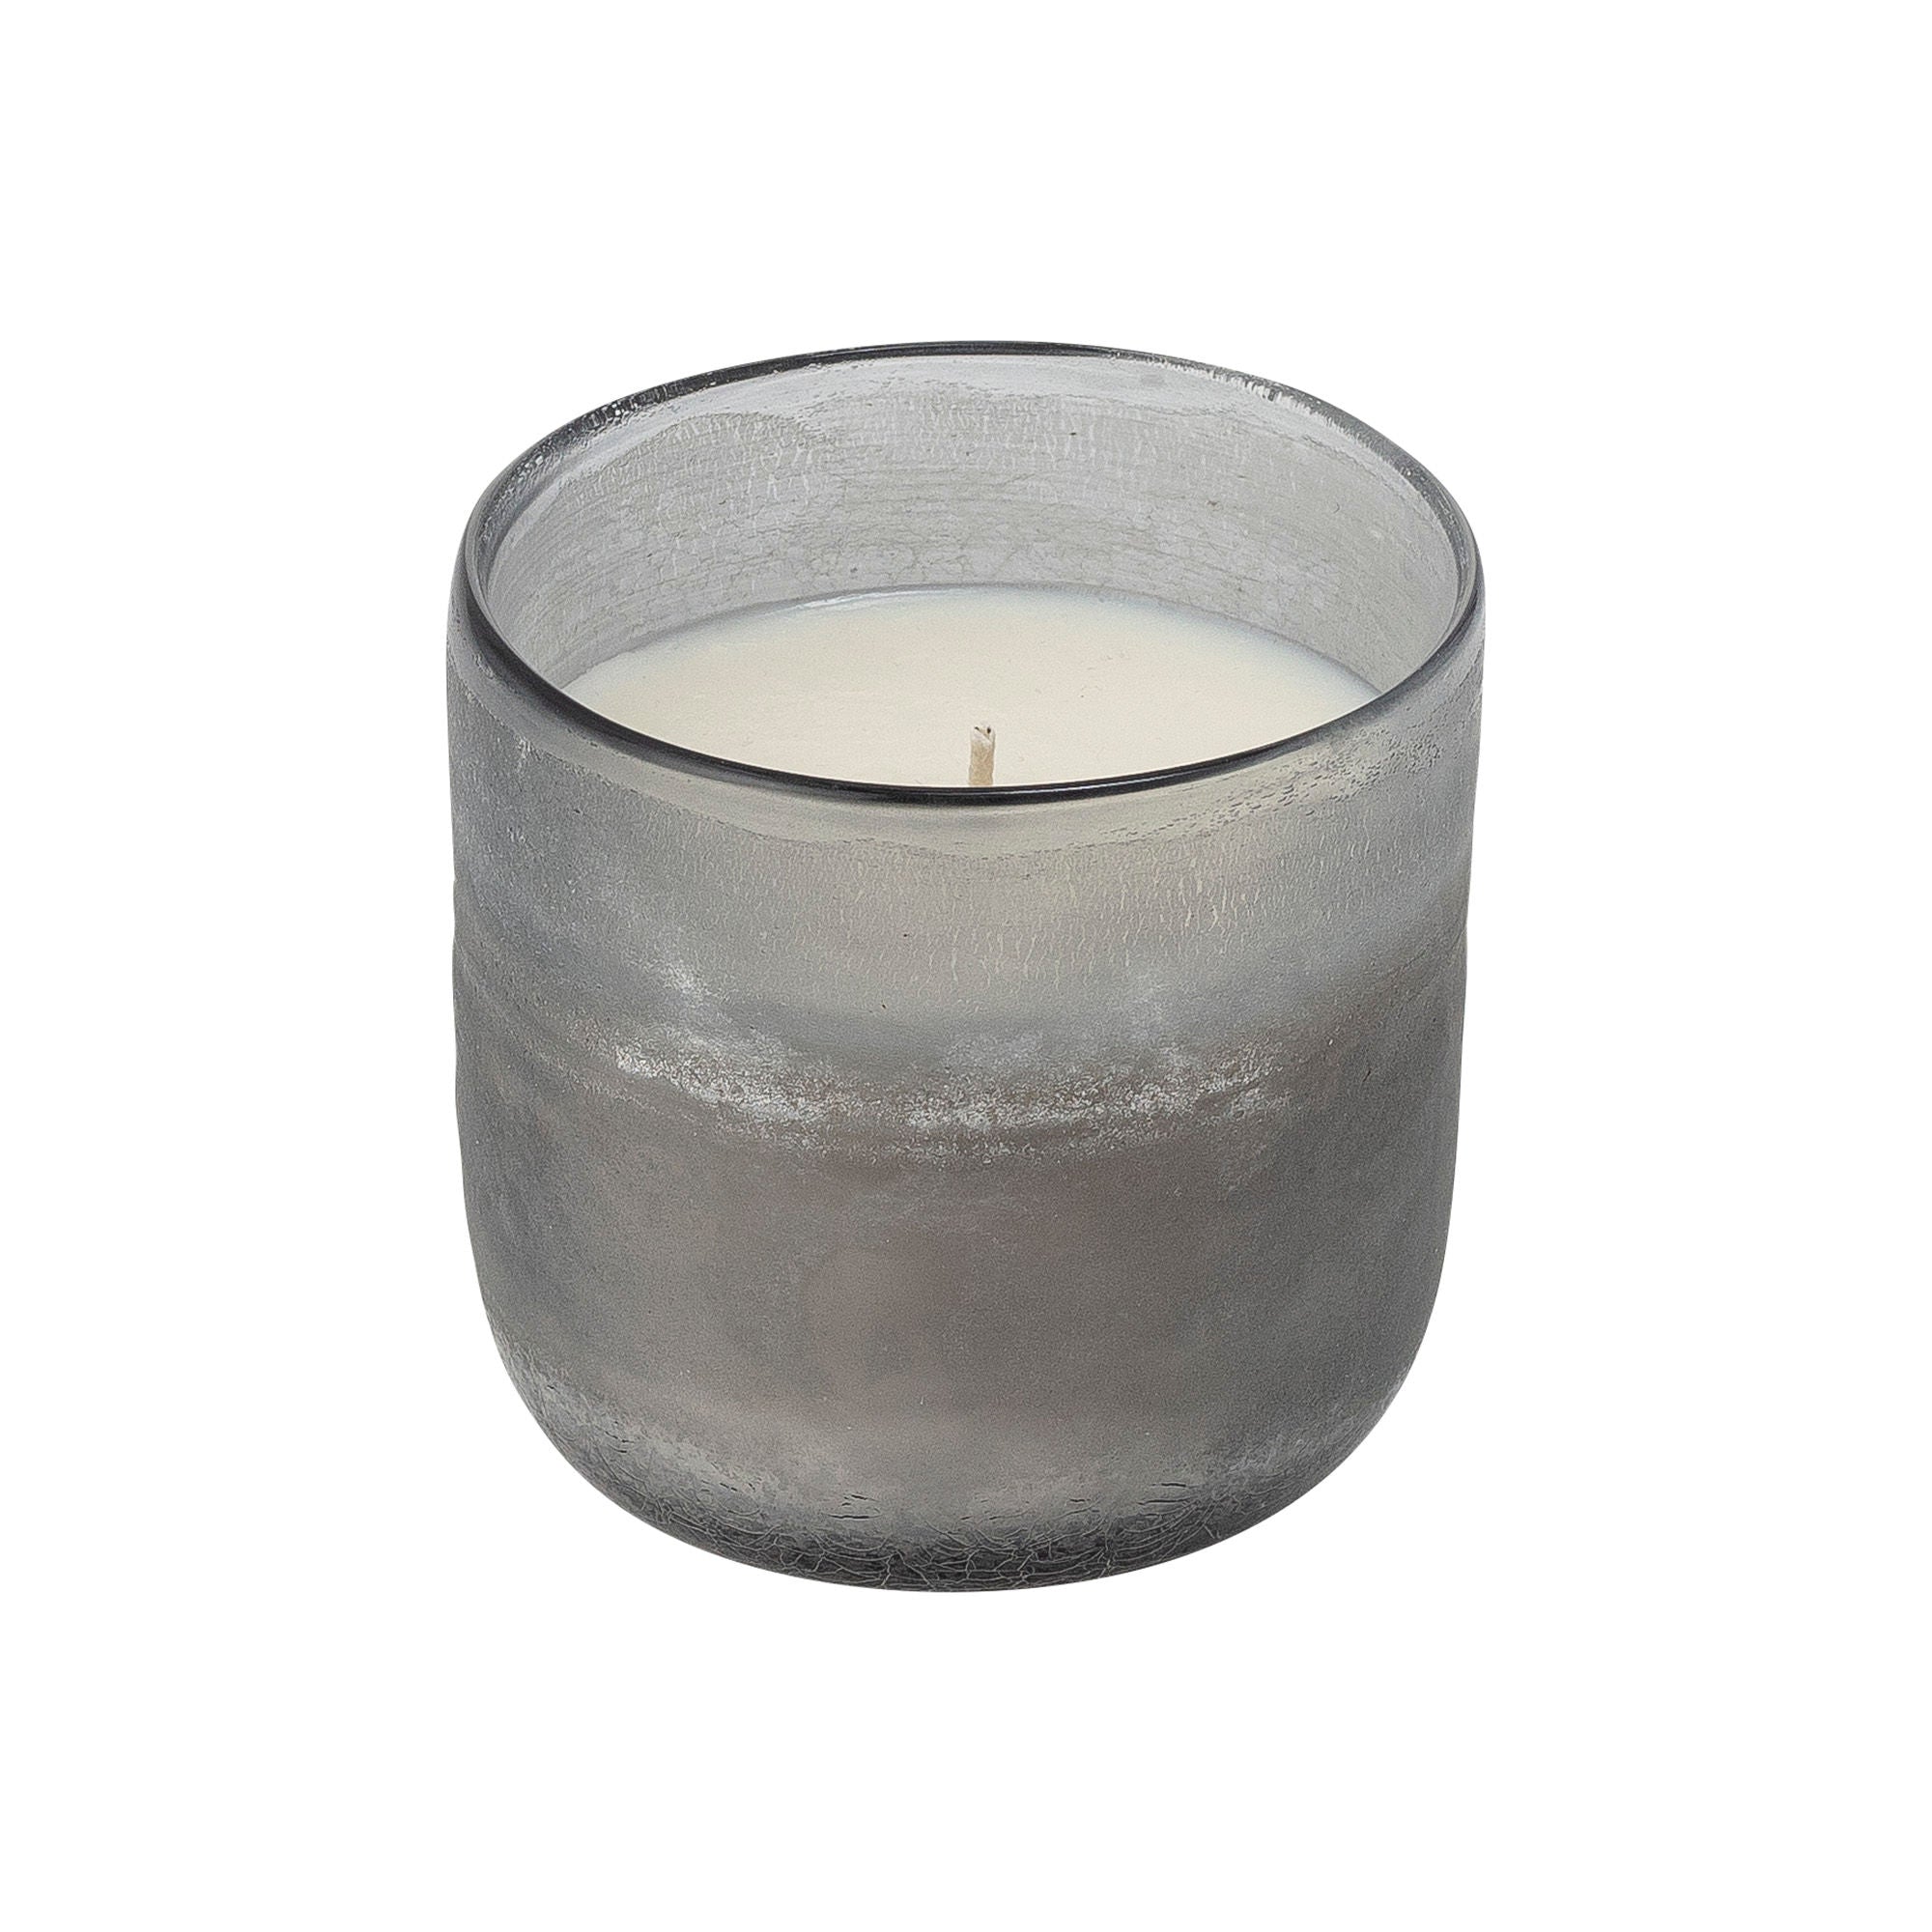 Illume X Bloomingville NO.3-Santal Fig Scent Candle, Blue, Natural Wax